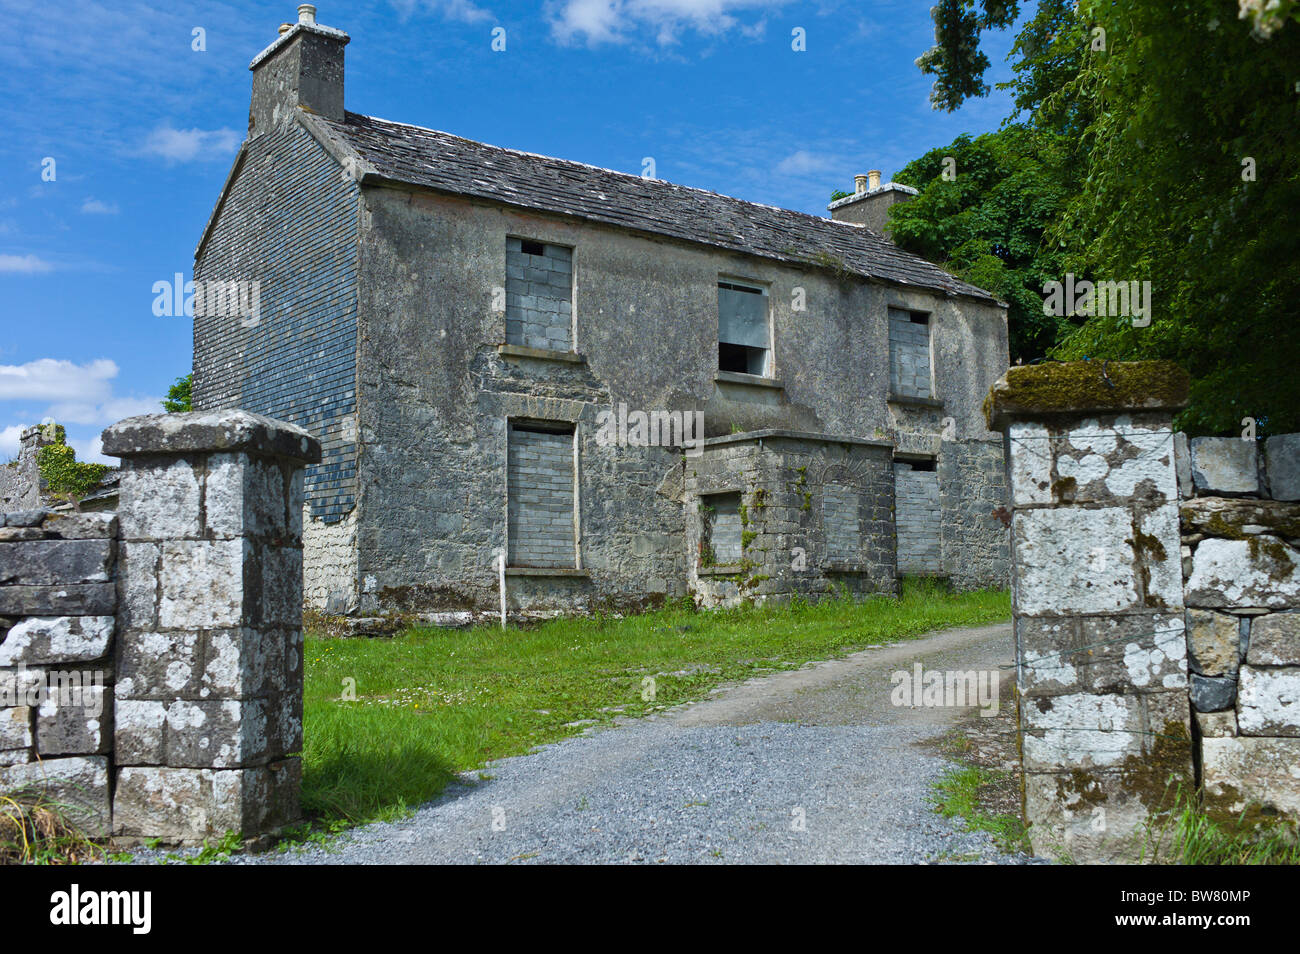 Derelict two-storey rectory house in rural setting, Kilfenora, County Clare, Ireland Stock Photo